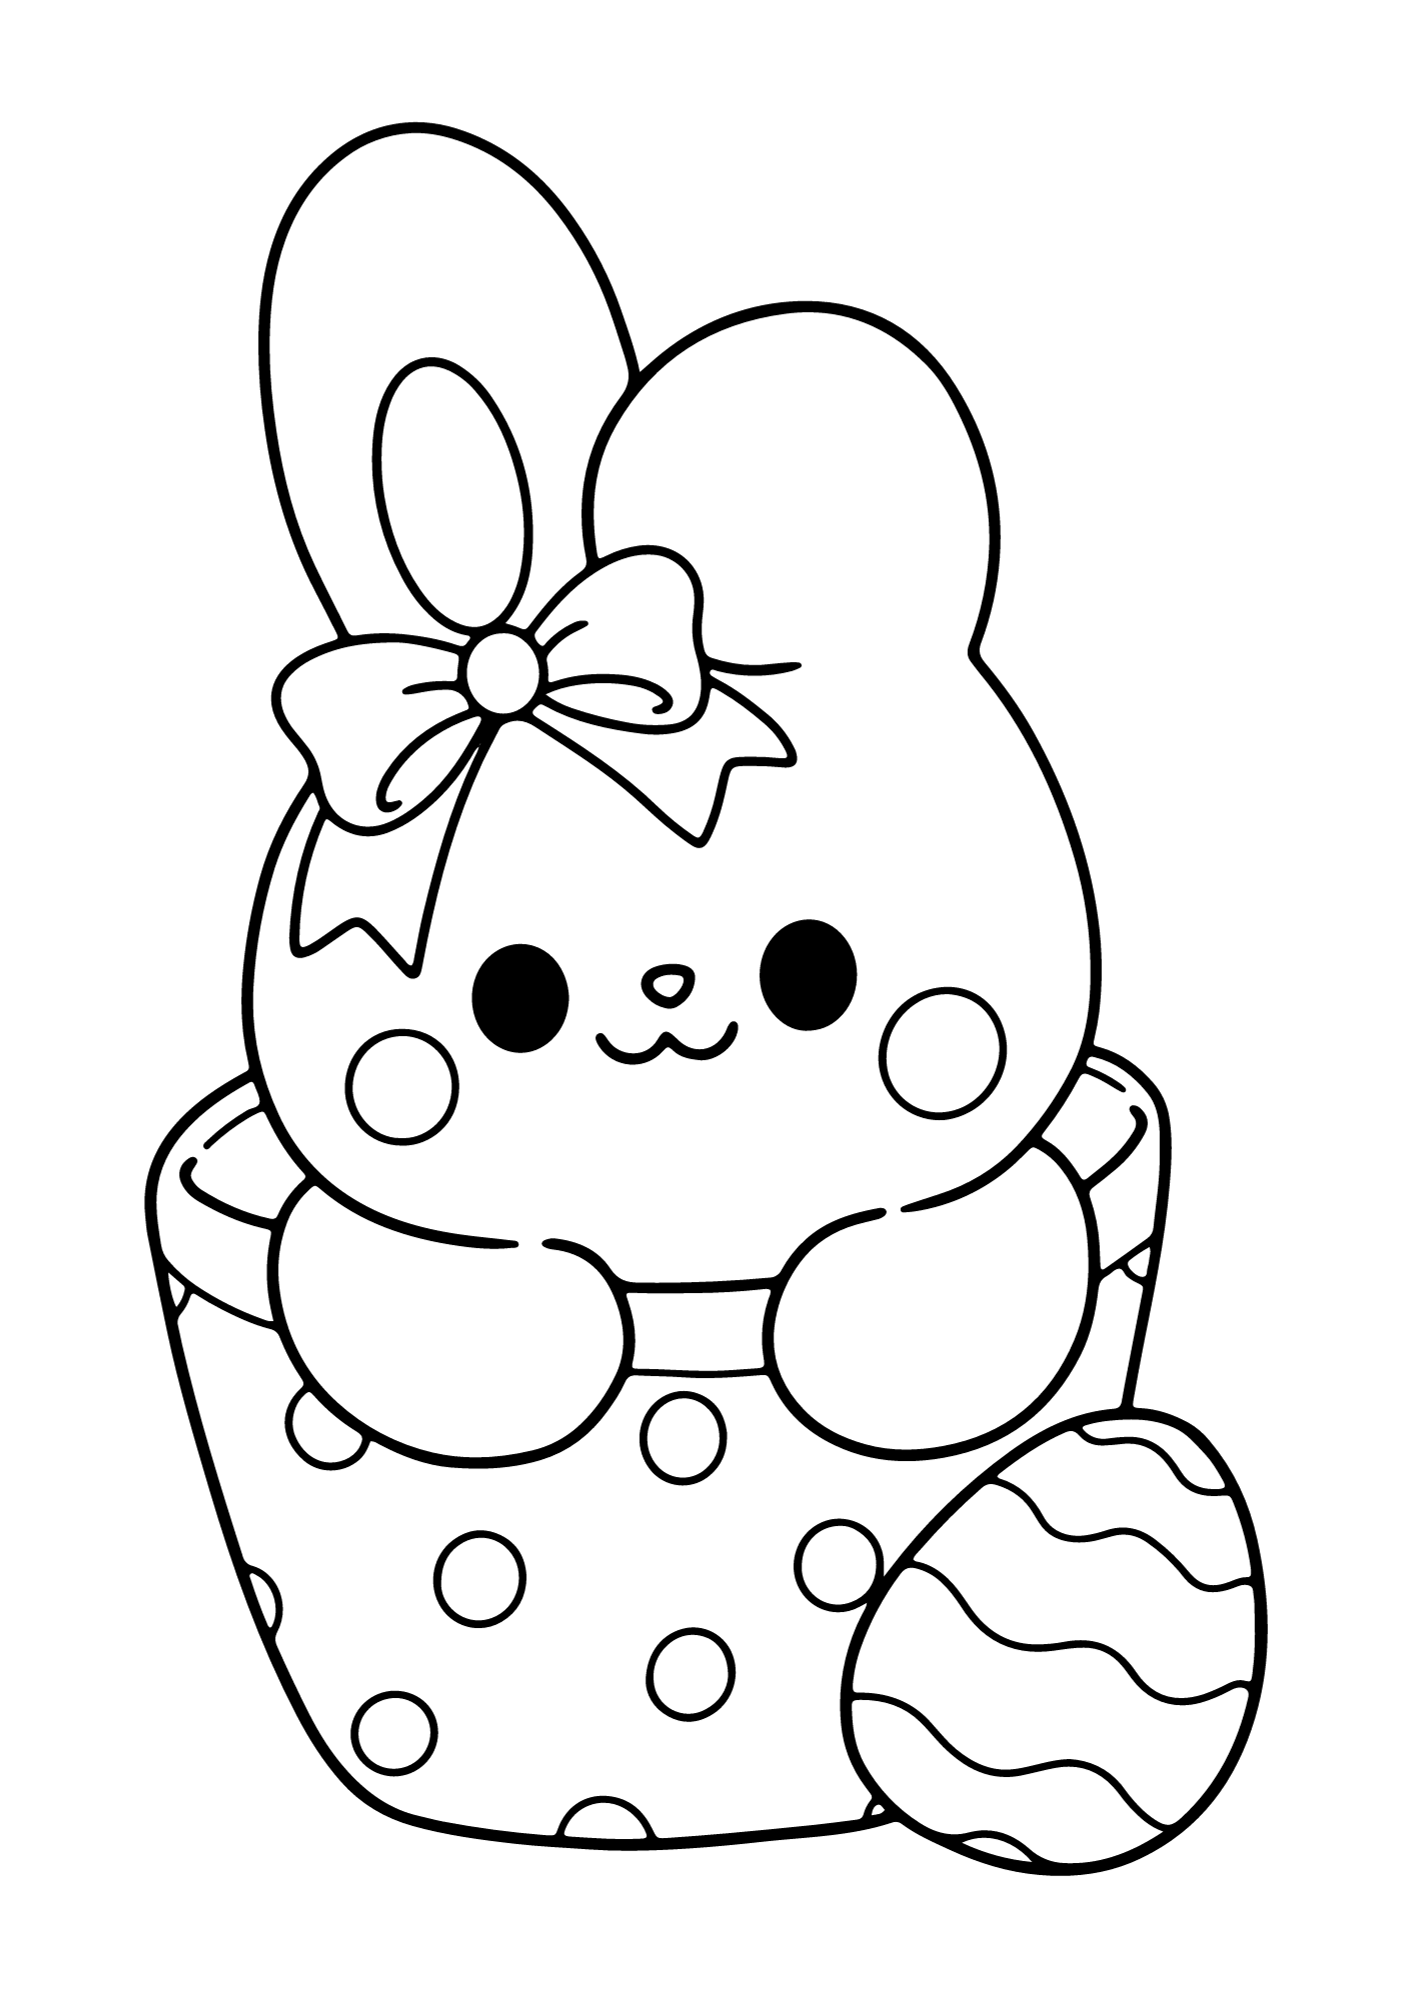 Bunny Easter Egg Coloring Page